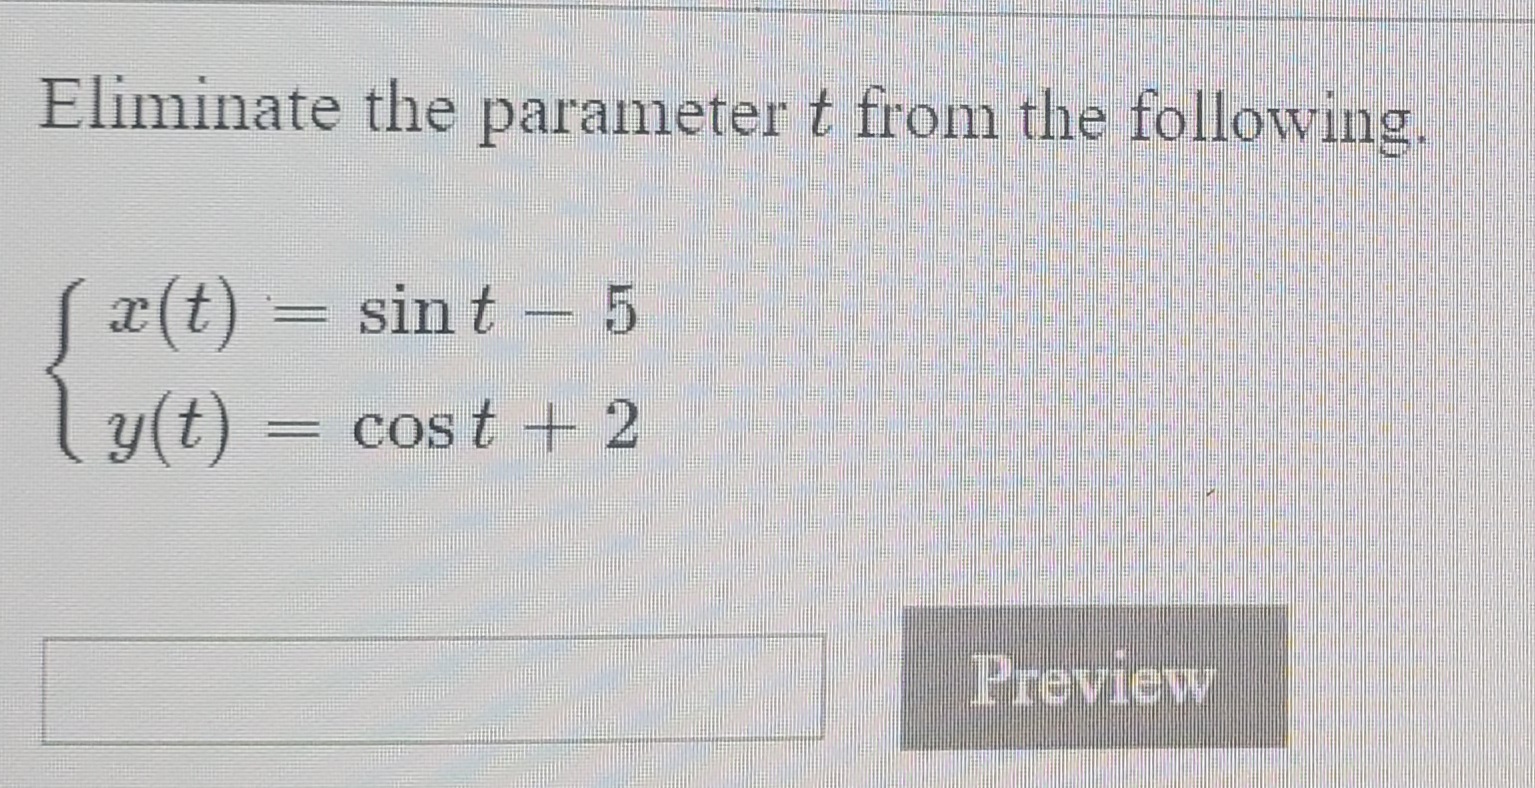 Eliminate the parameter t from the following.
S
x(t) = sin t - 5
Ly(t)
cos t + 2
